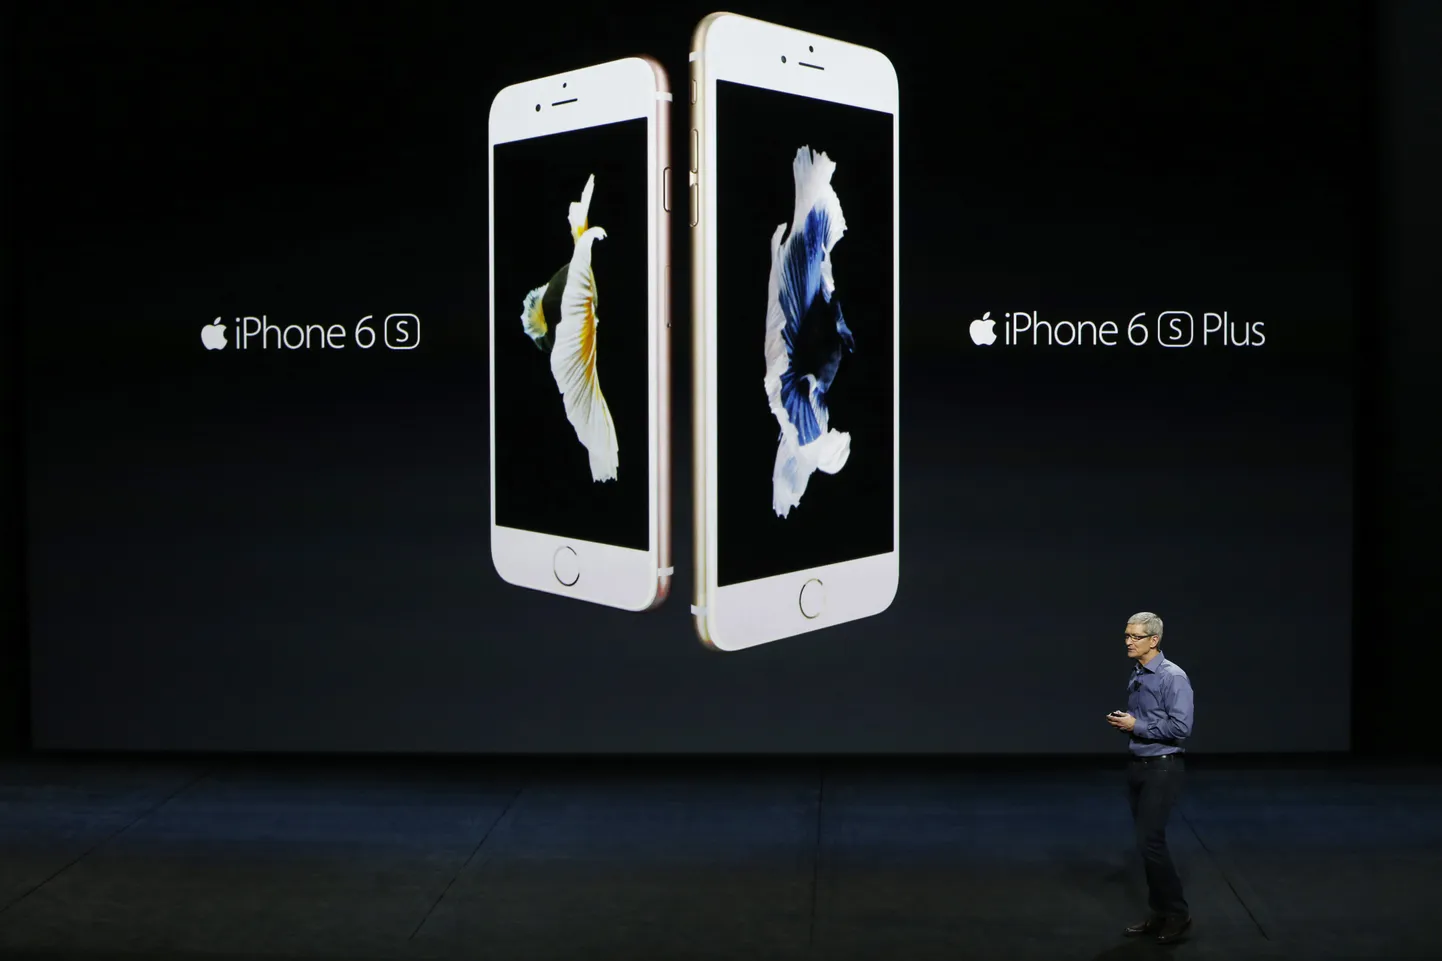 SAN FRANCISCO, CA - SEPTEMBER 9: Apple CEO Tim Cook introduces the new iPhone 6s and 6s Plus during a Special Event at Bill Graham Civic Auditorium September 9, 2015 in San Francisco, California. Apple Inc. unveiled latest iterations of its smart phone, forecasted to be the 6S and 6S Plus. The tech giant is also rumored to be planning to announce an update to its Apple TV set-top box.   Stephen Lam/ Getty Images/AFP
== FOR NEWSPAPERS, INTERNET, TELCOS & TELEVISION USE ONLY ==